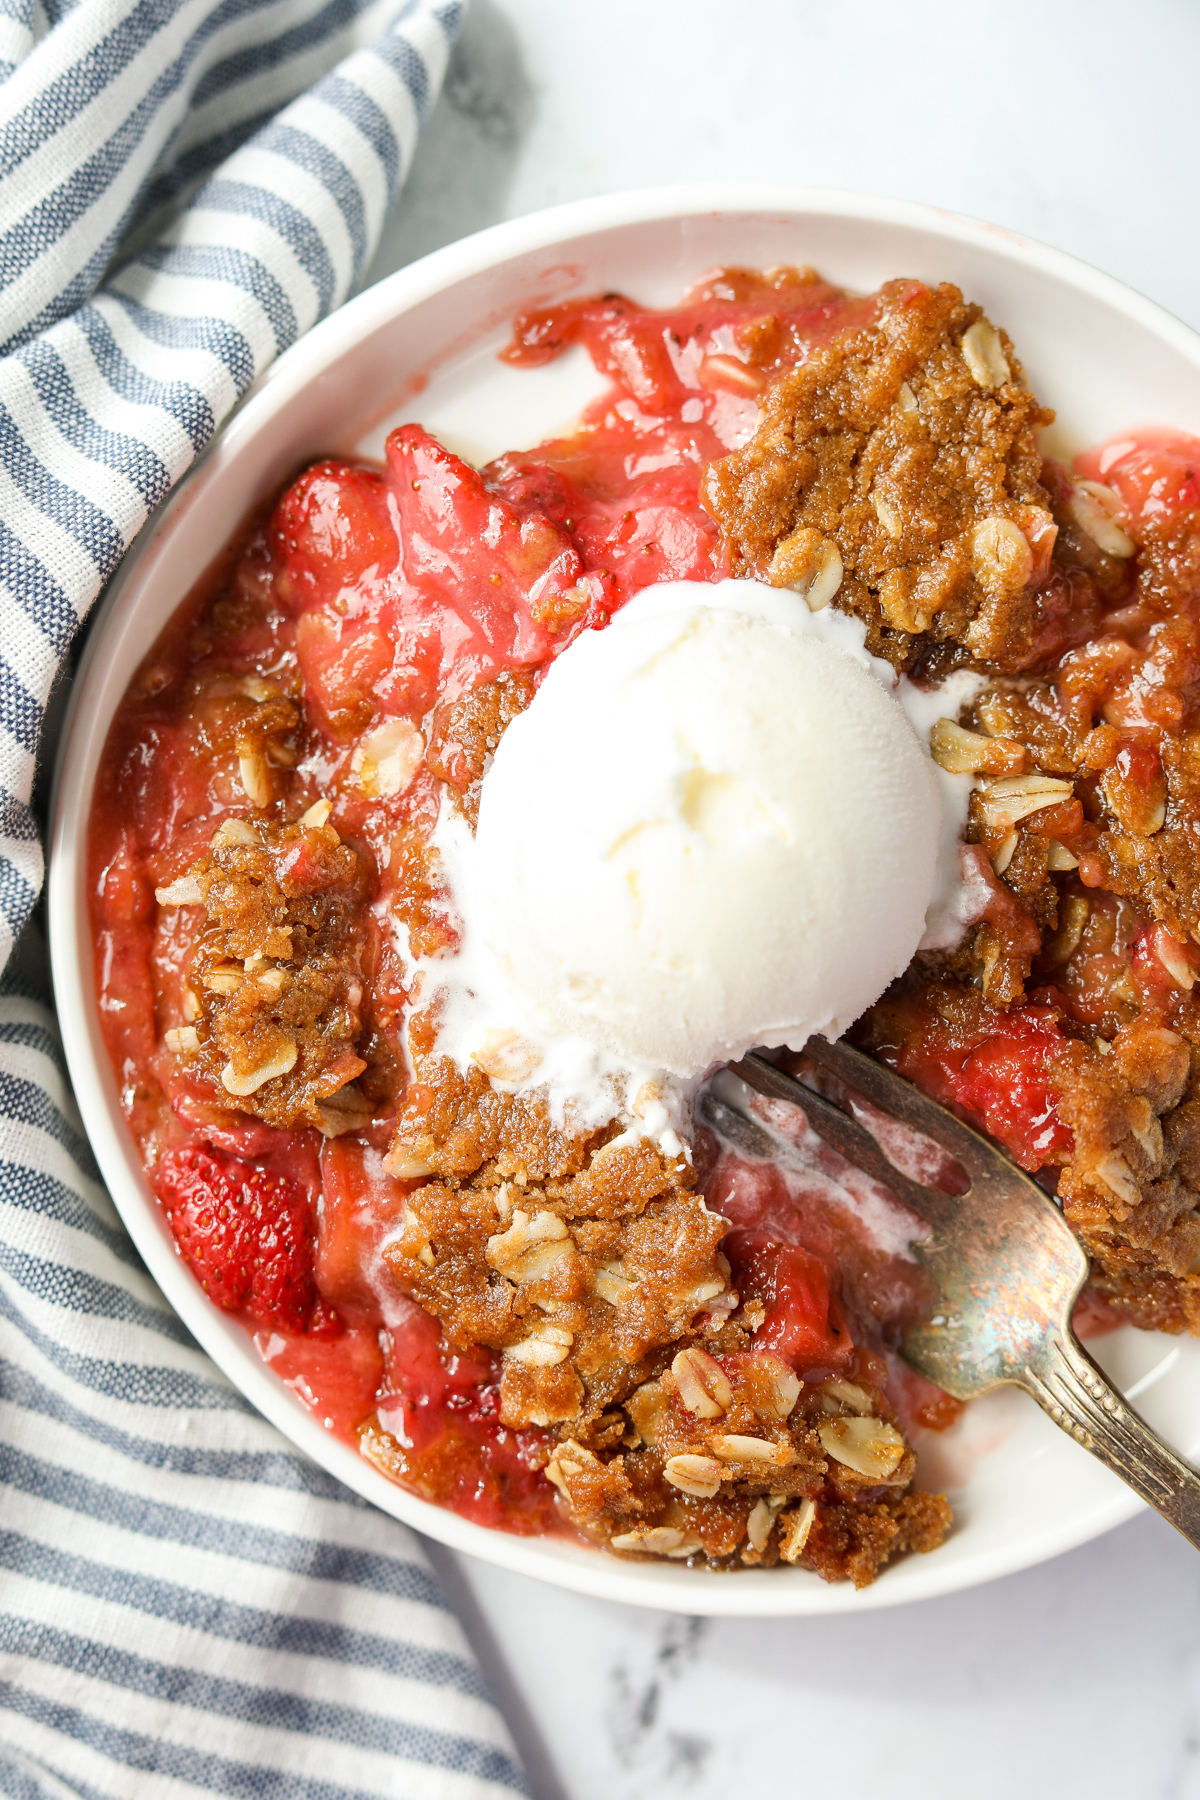 A bowl of rhubarb crisp with strawberries, and served with a scoop of vanilla ice cream.